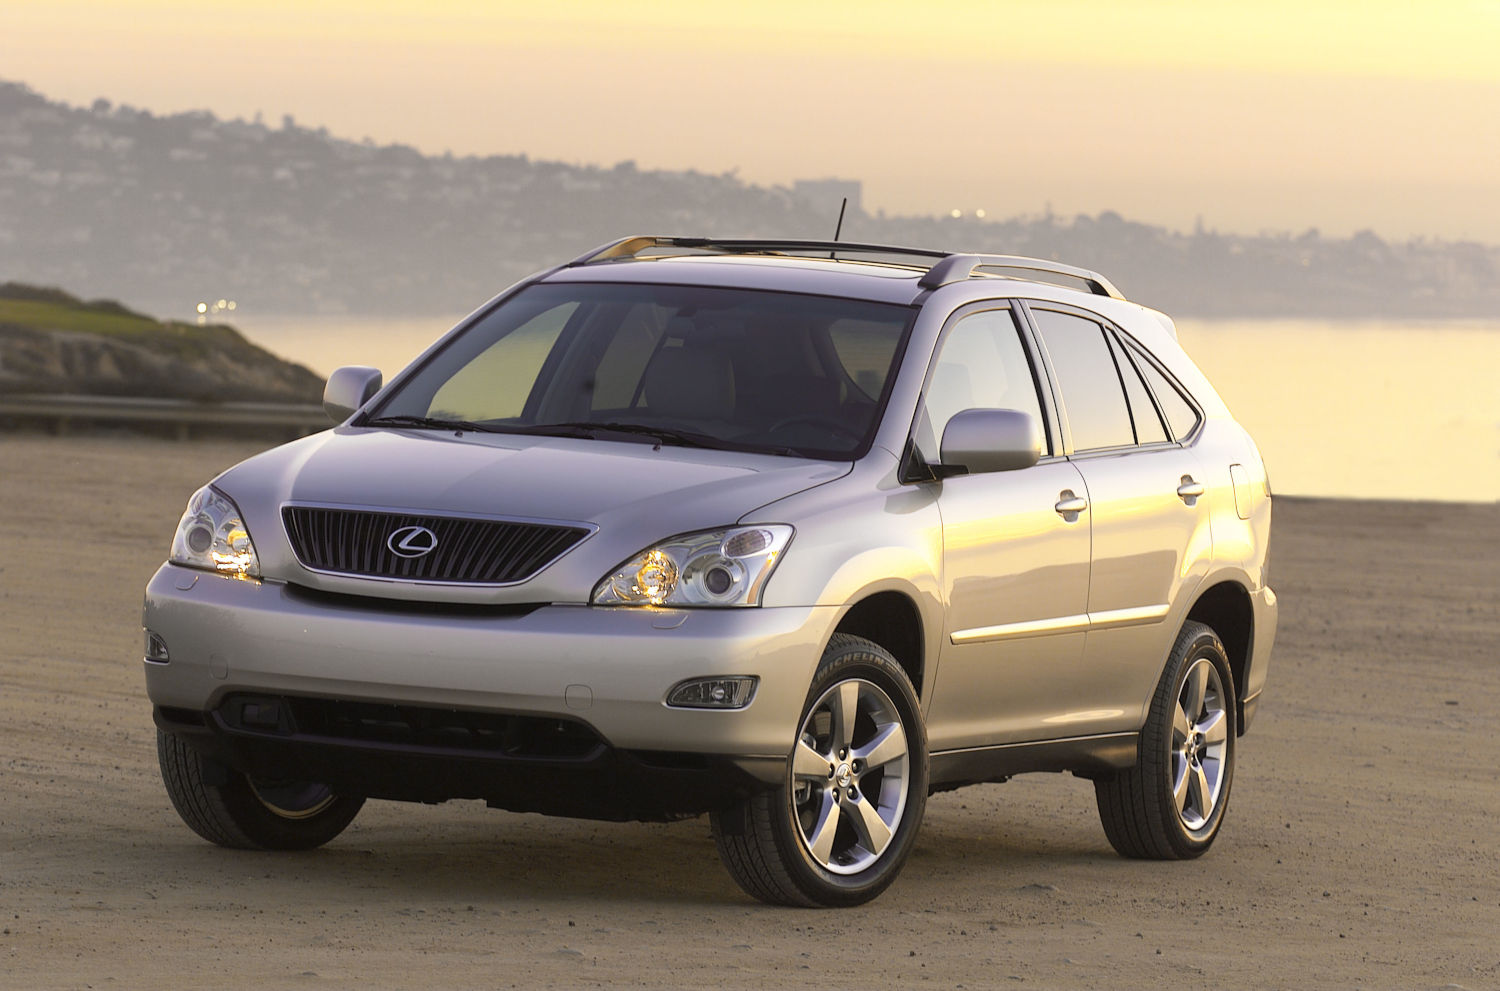 This 2007 Lexus RX is one of the most reliable SUVs